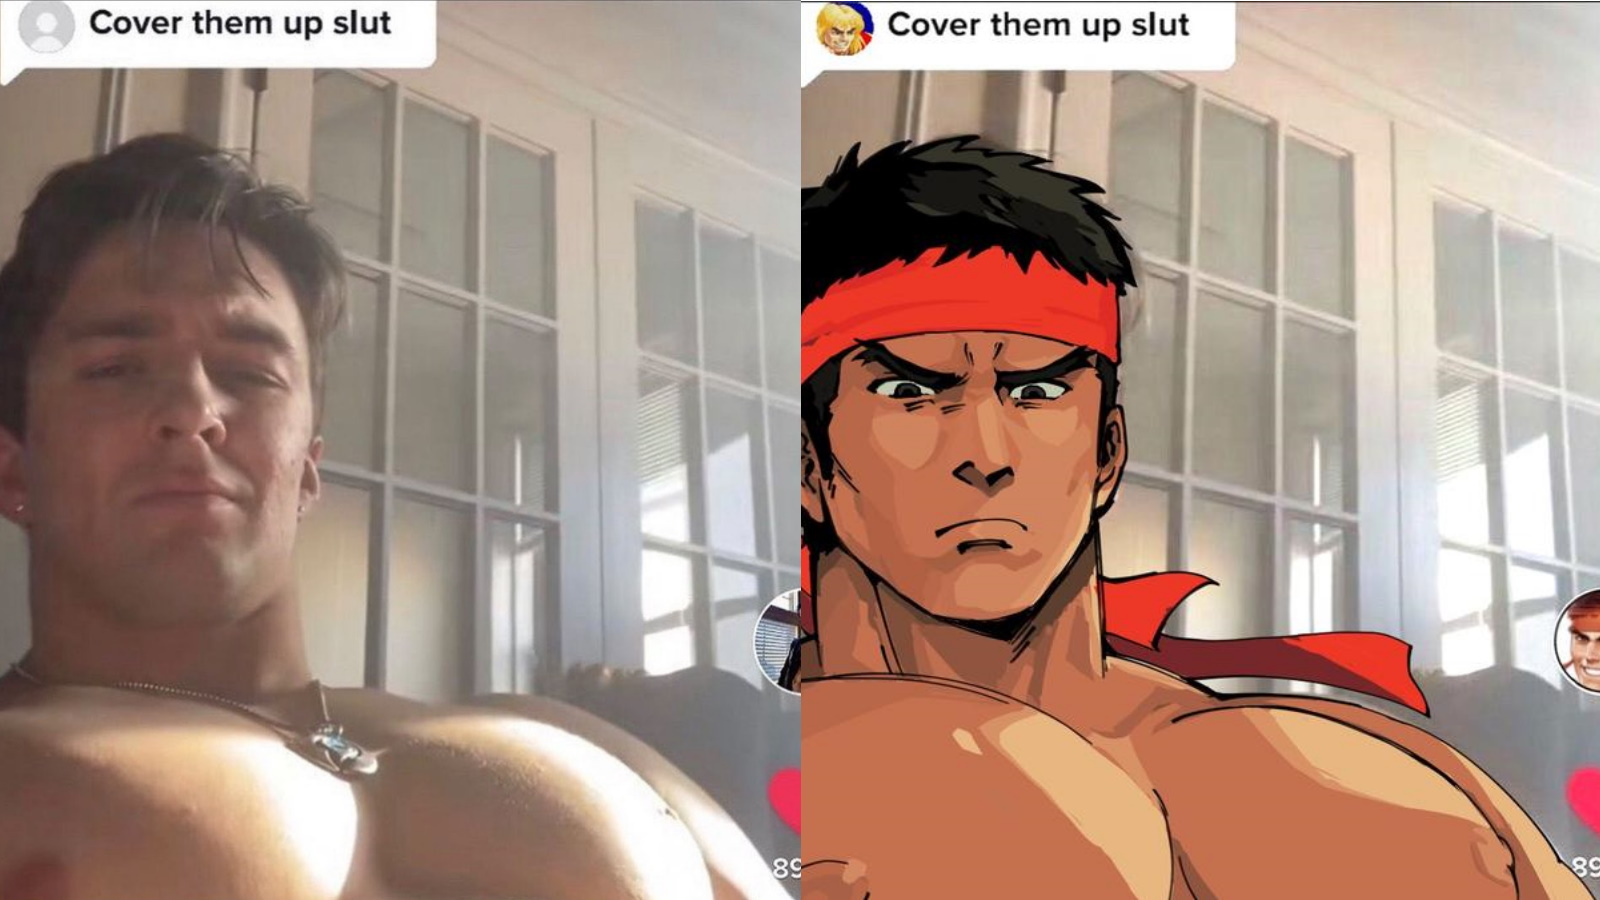 Know Your Meme on X: Cover Them Up, Slut trend, started by @tartagliare  and featuring Majorpectoralis from TikTok, has Twitter artists redrawing  their favorite himbos with massive pecs. t.corfdsXEwW4c  t.coegOMK4w6MD  X